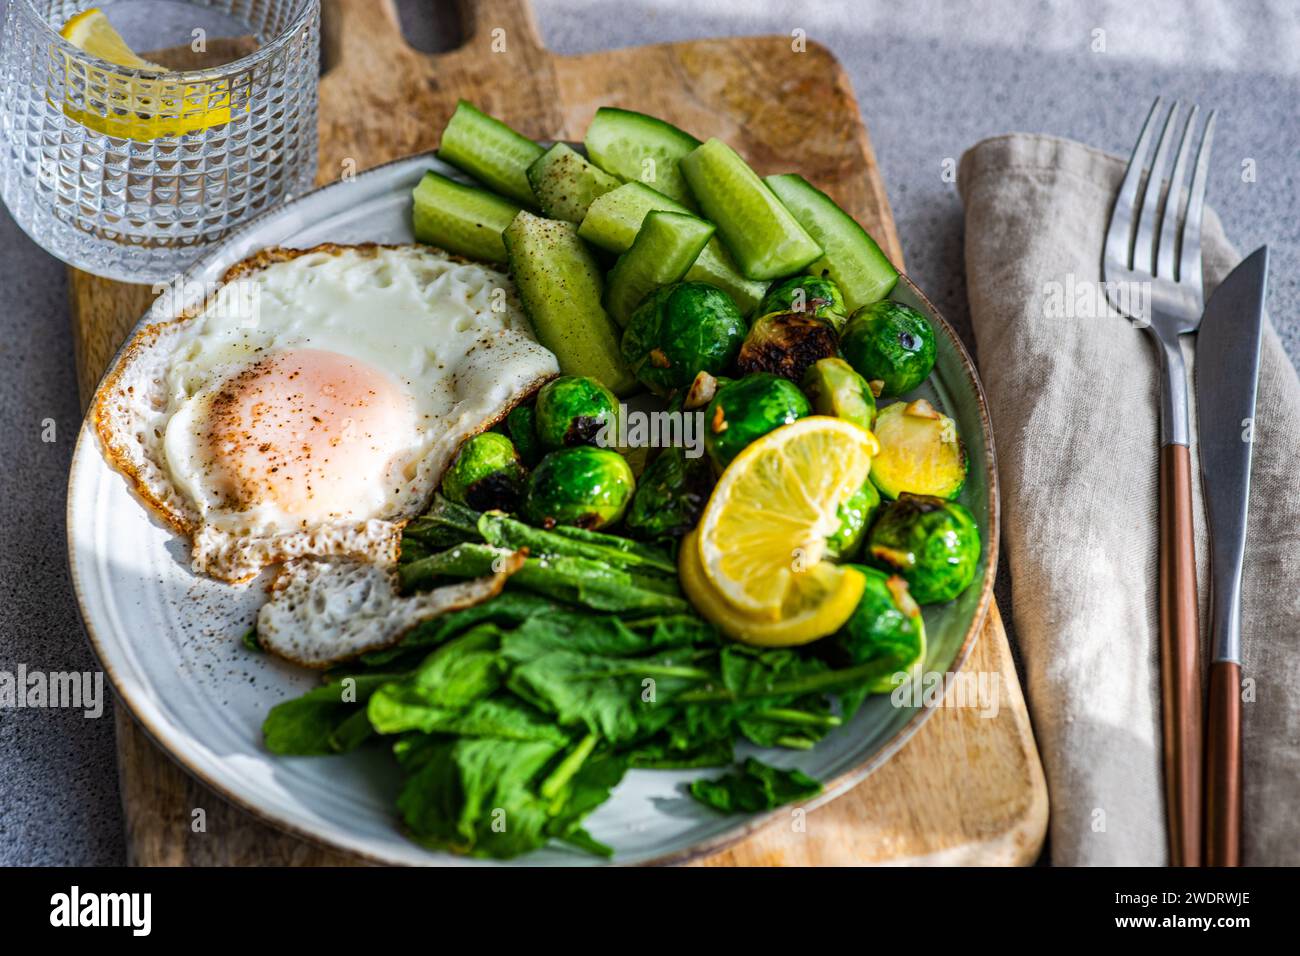 Healthy lunch with grilled Brussels sprouts Stock Photo